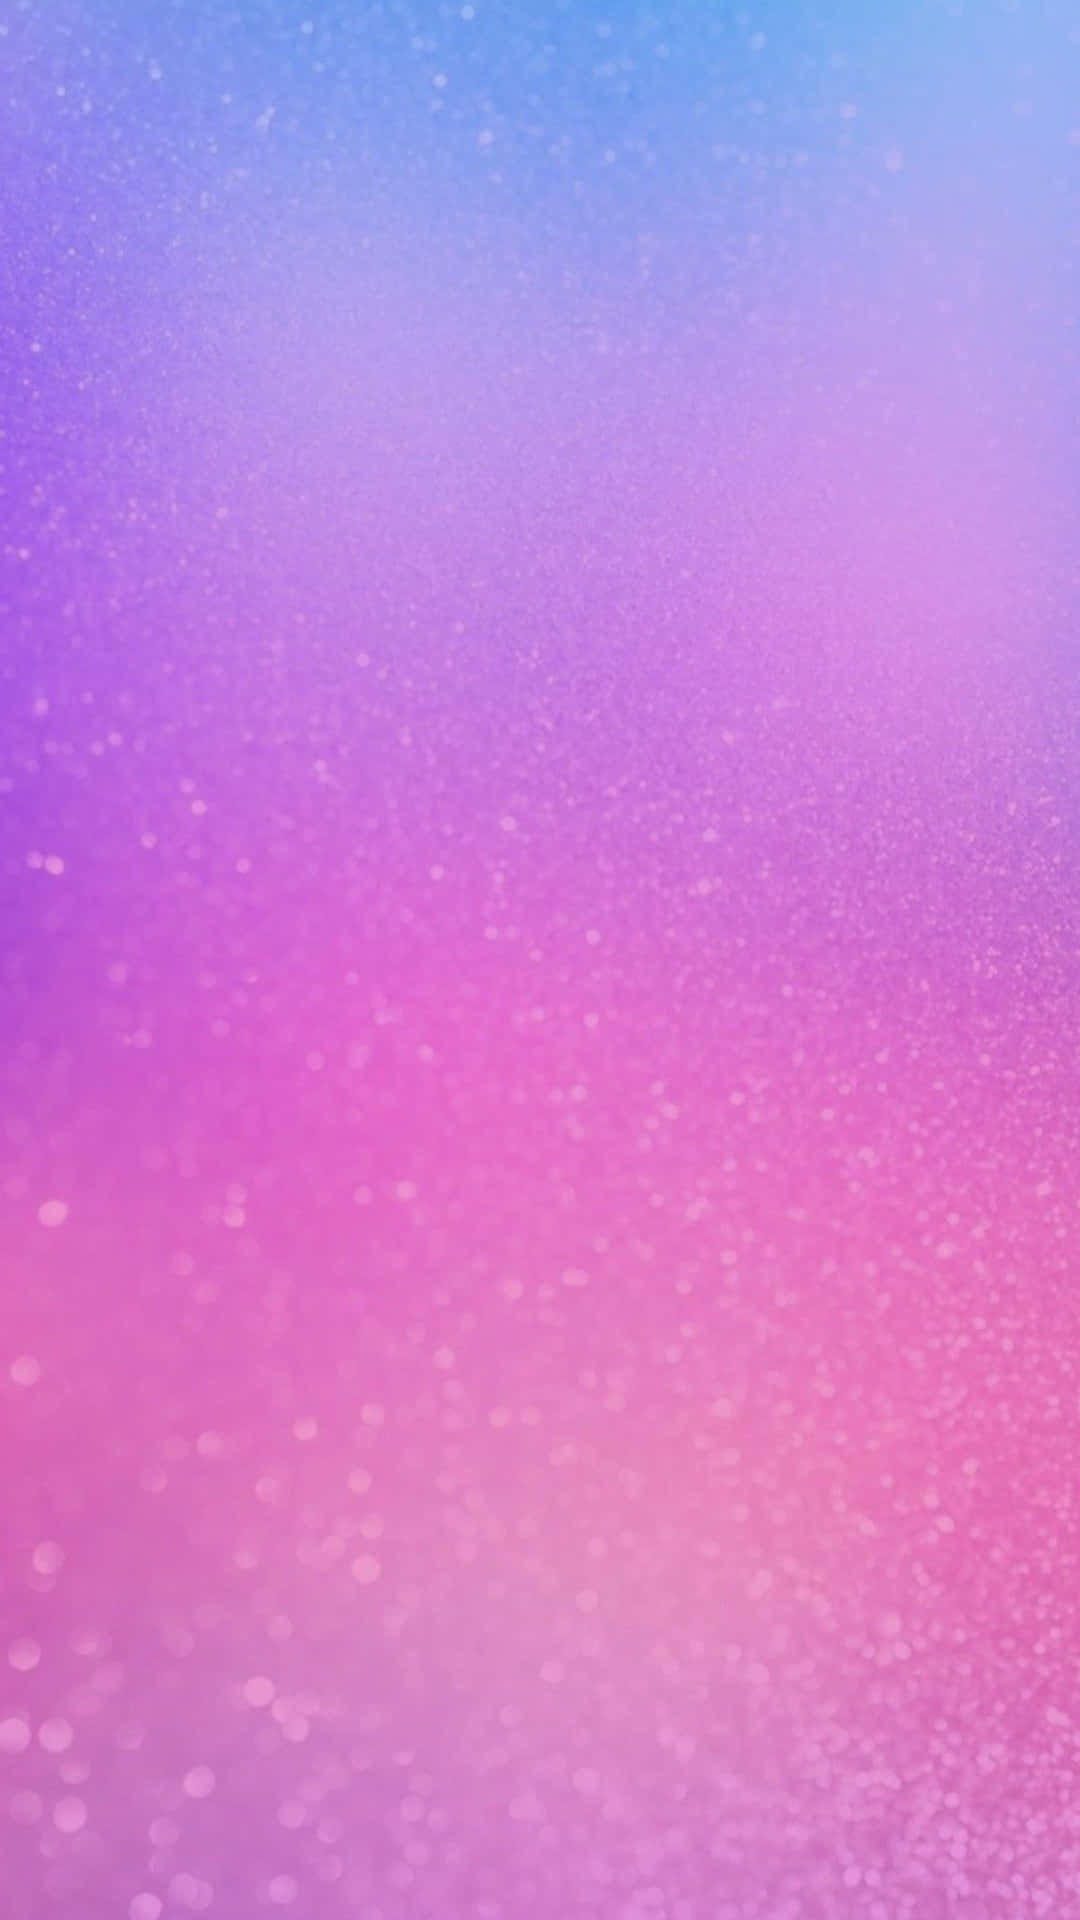 A Pink And Purple Blurred Background With Hearts Wallpaper